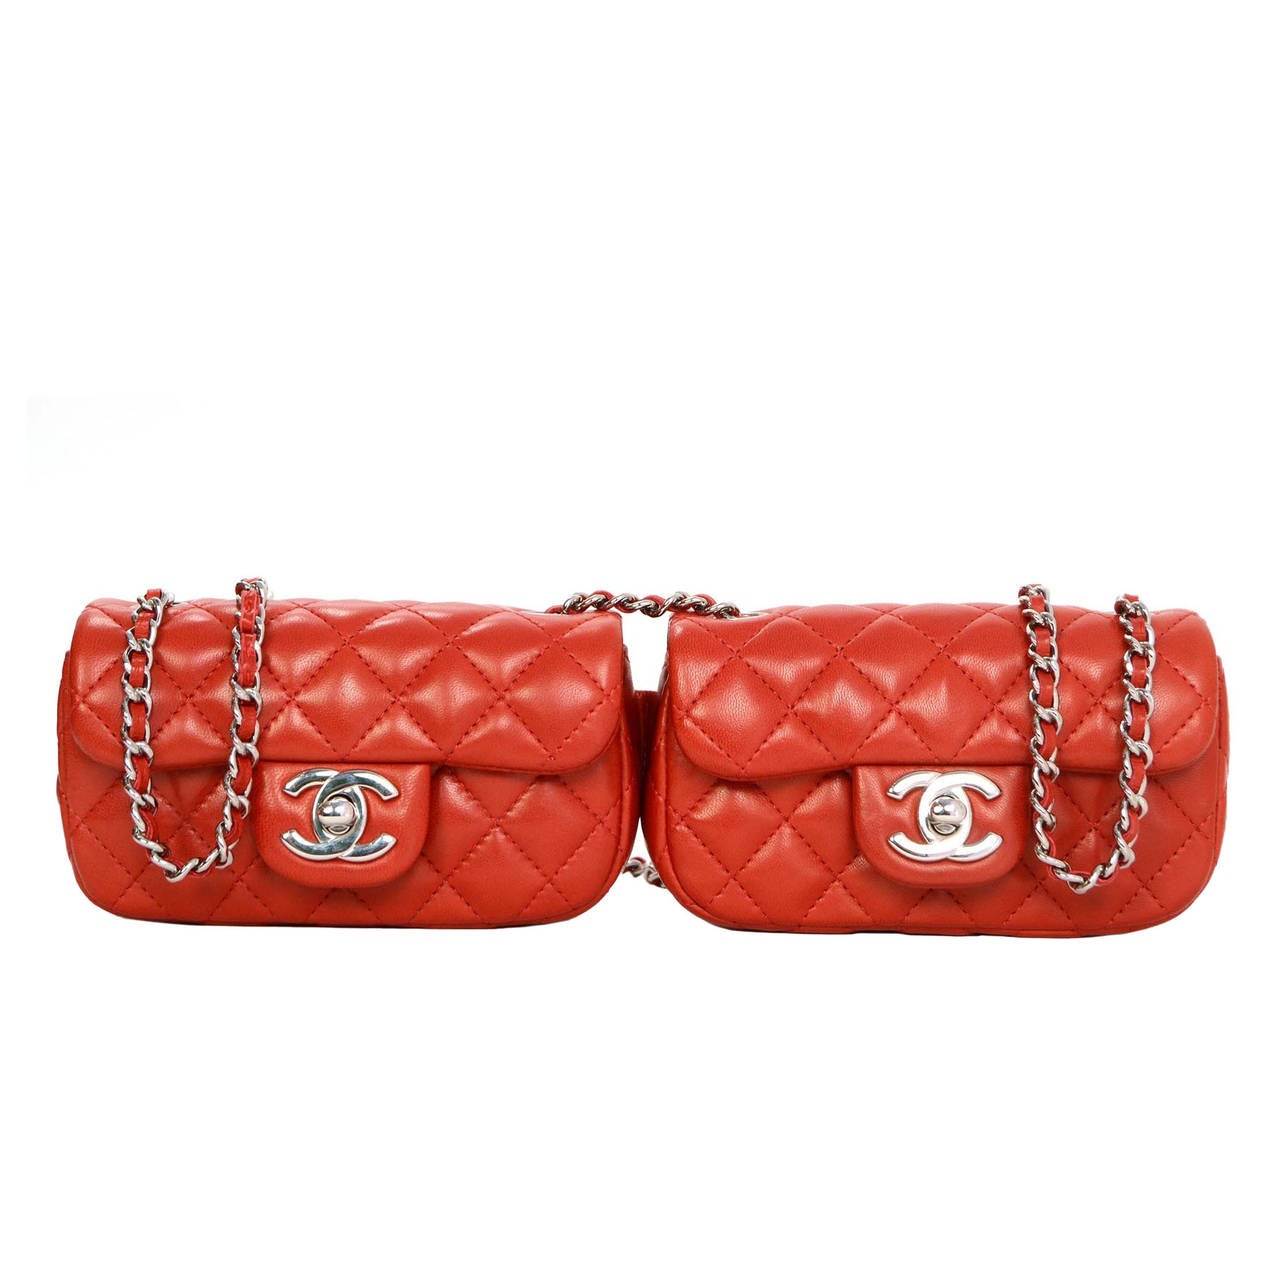 CHANEL Red Quilted Lambskin Double Mini Crossbody Flap Bag SHW at 1stdibs